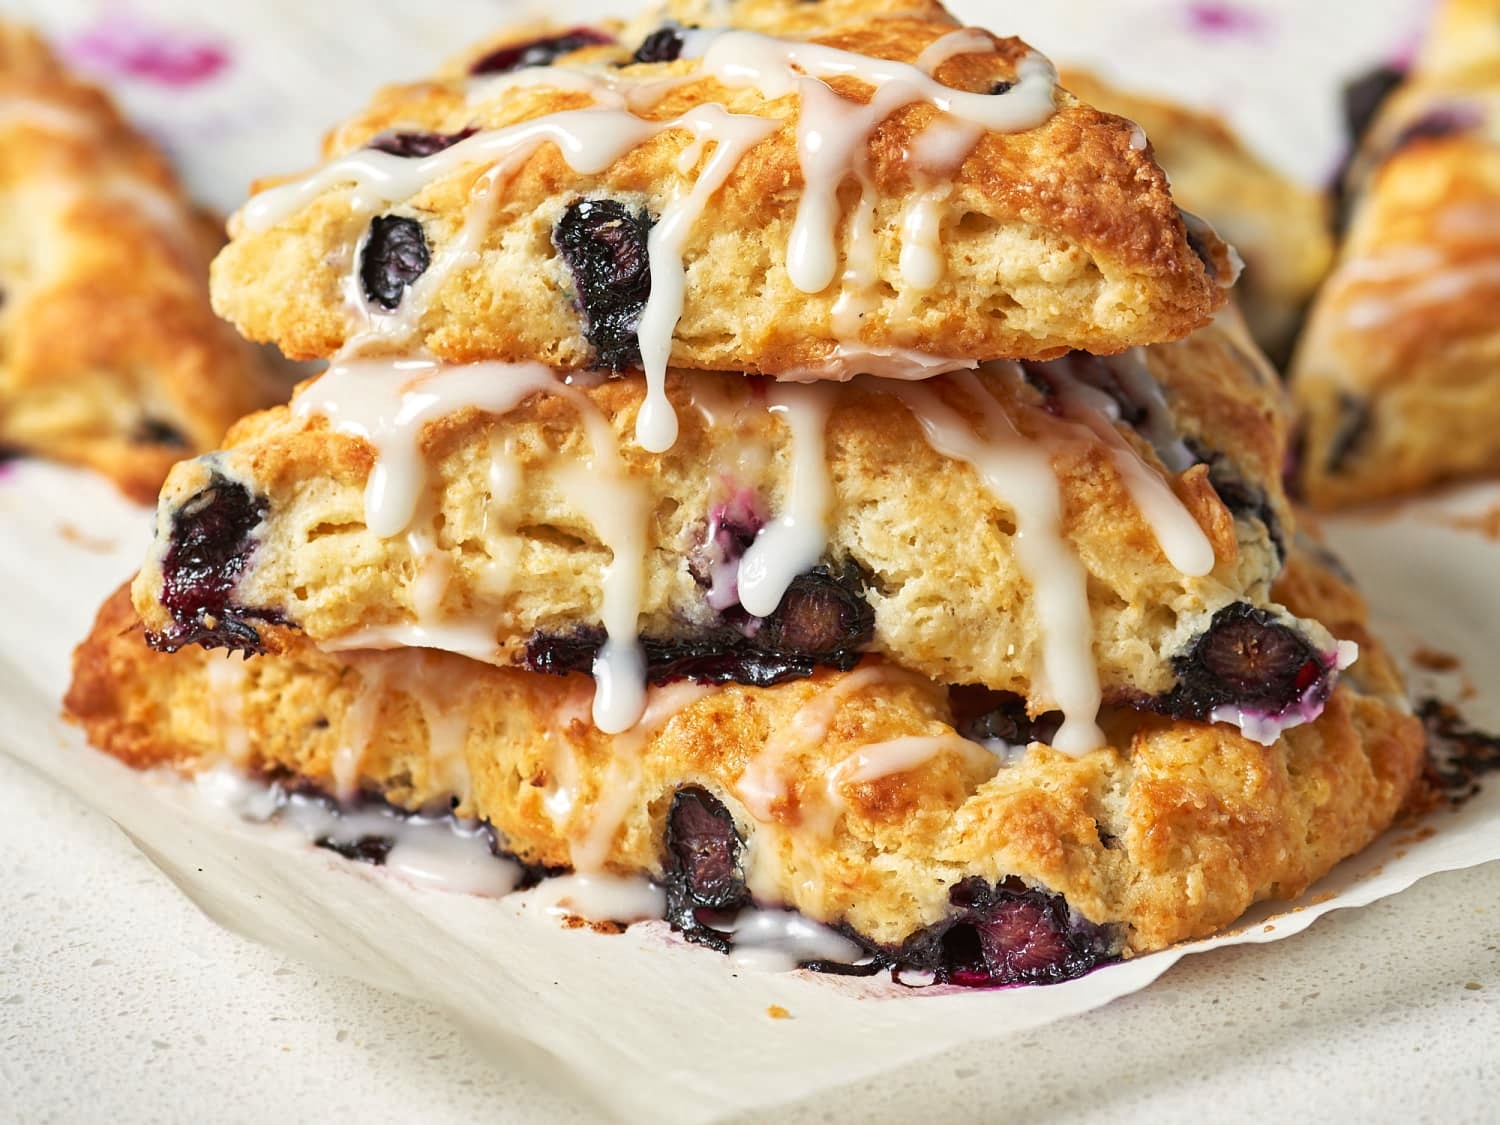 freeze-scone-dough-to-bake-up-a-breakfast-treat-any-time